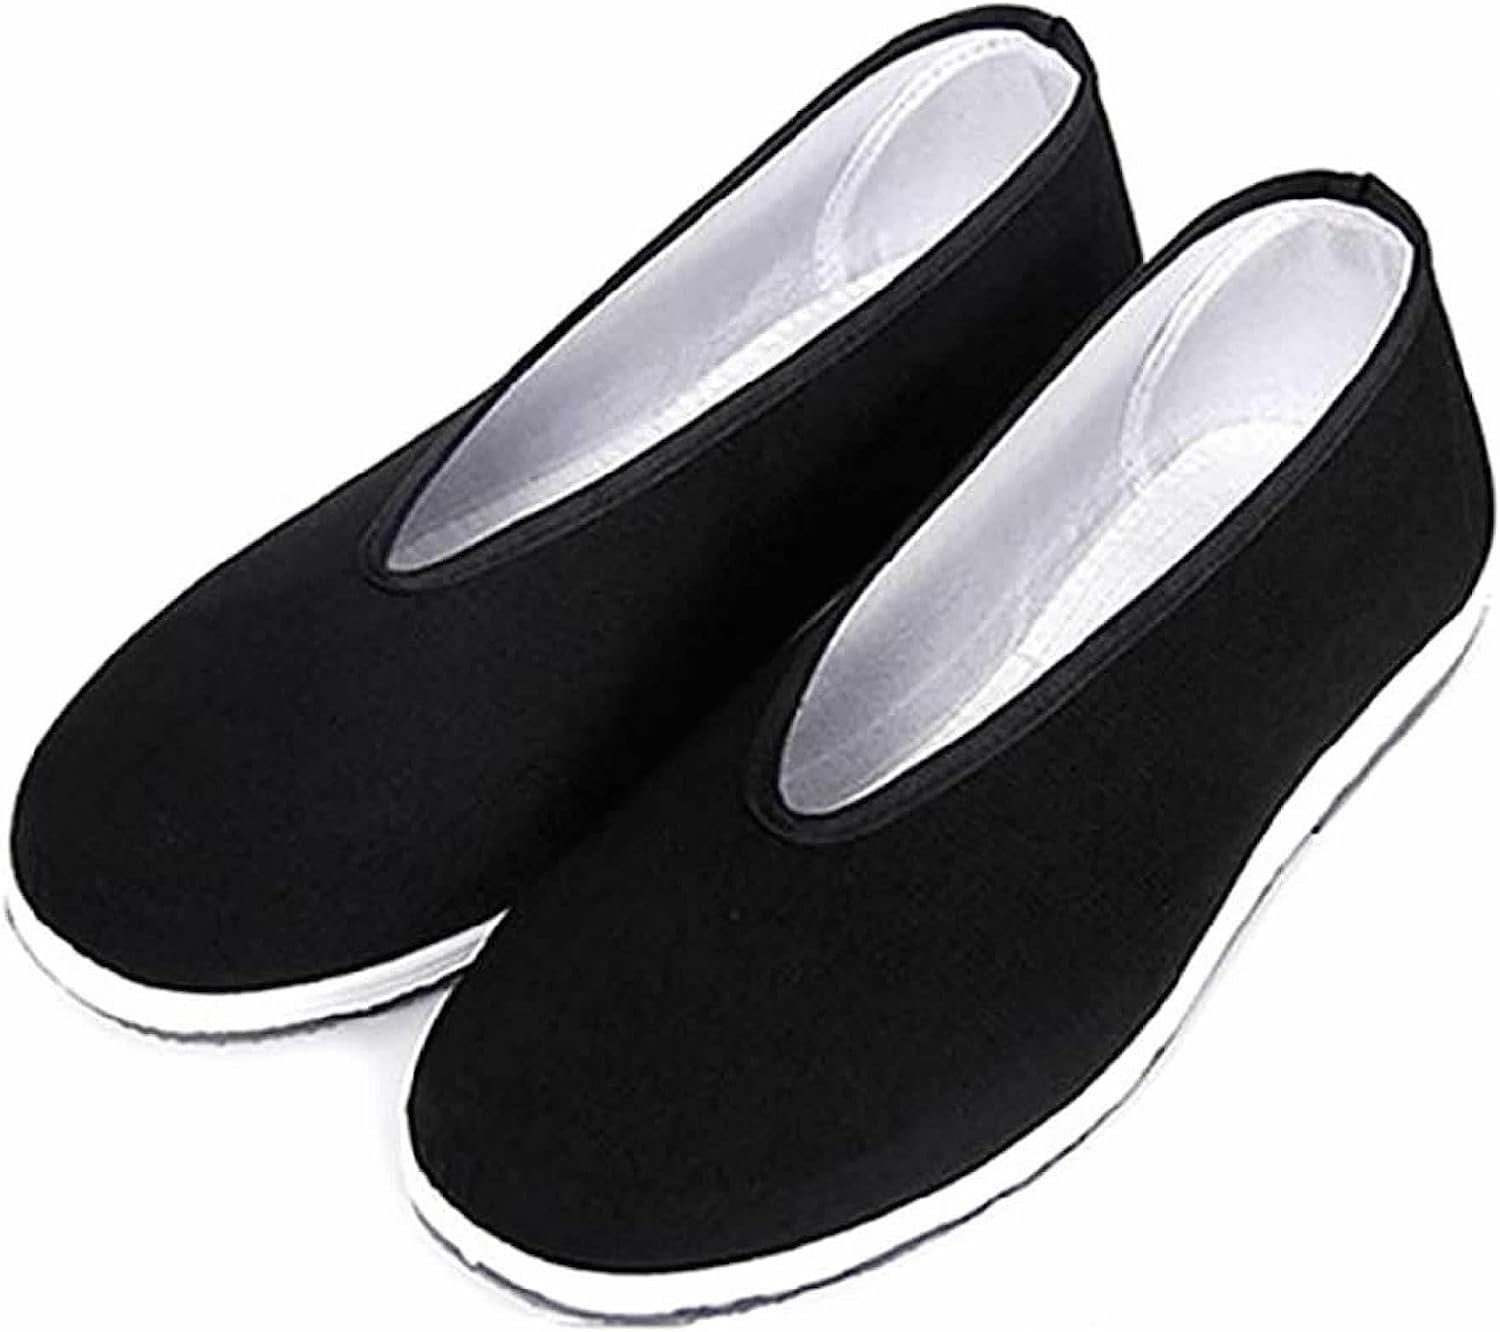 Shoes8teen Men's Martial Art Kung Fu Tai Chi Rubber Sole Canvas Shoes ...